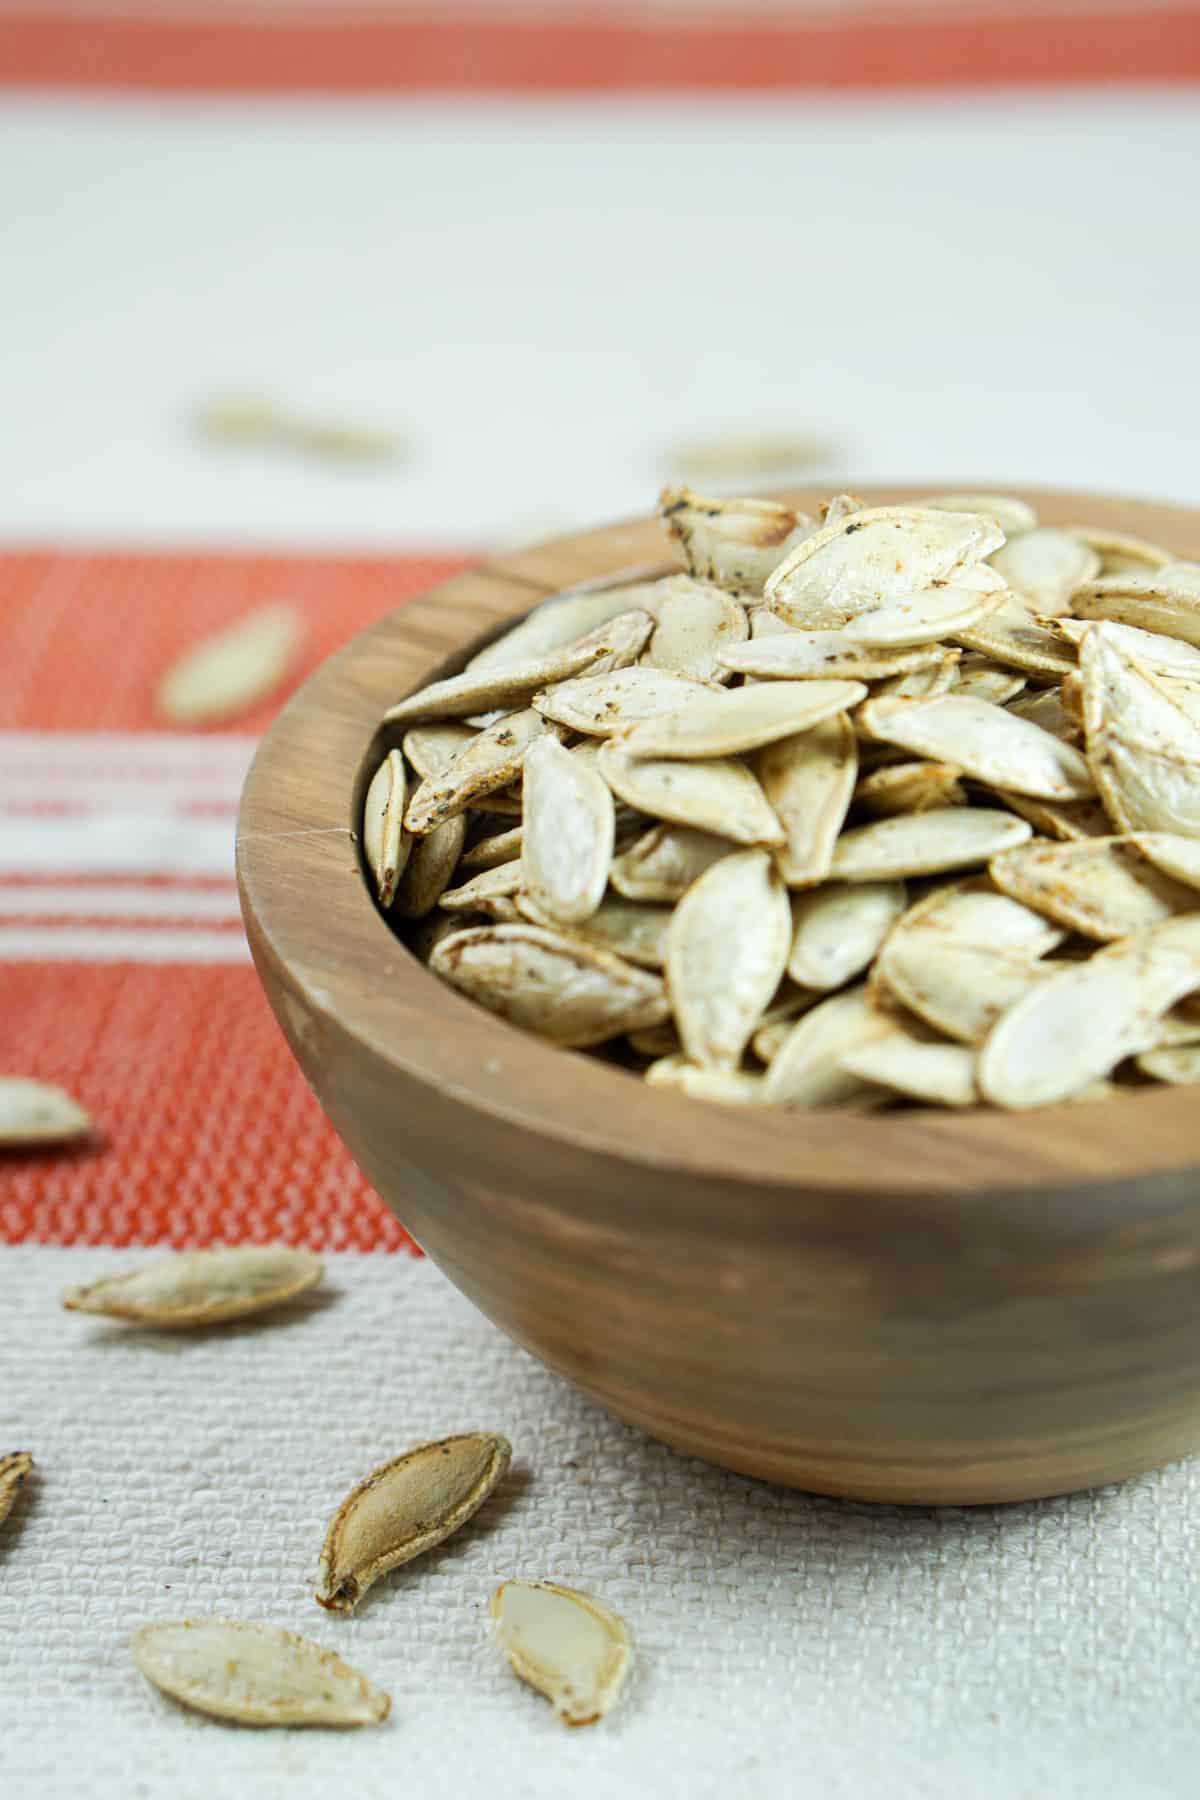 This toasted salted pumpkin seeds recipe is ridiculously easy. Wash & strain, season, dry and roast for deliciously crisp seeds. Then crunch away and enjoy!